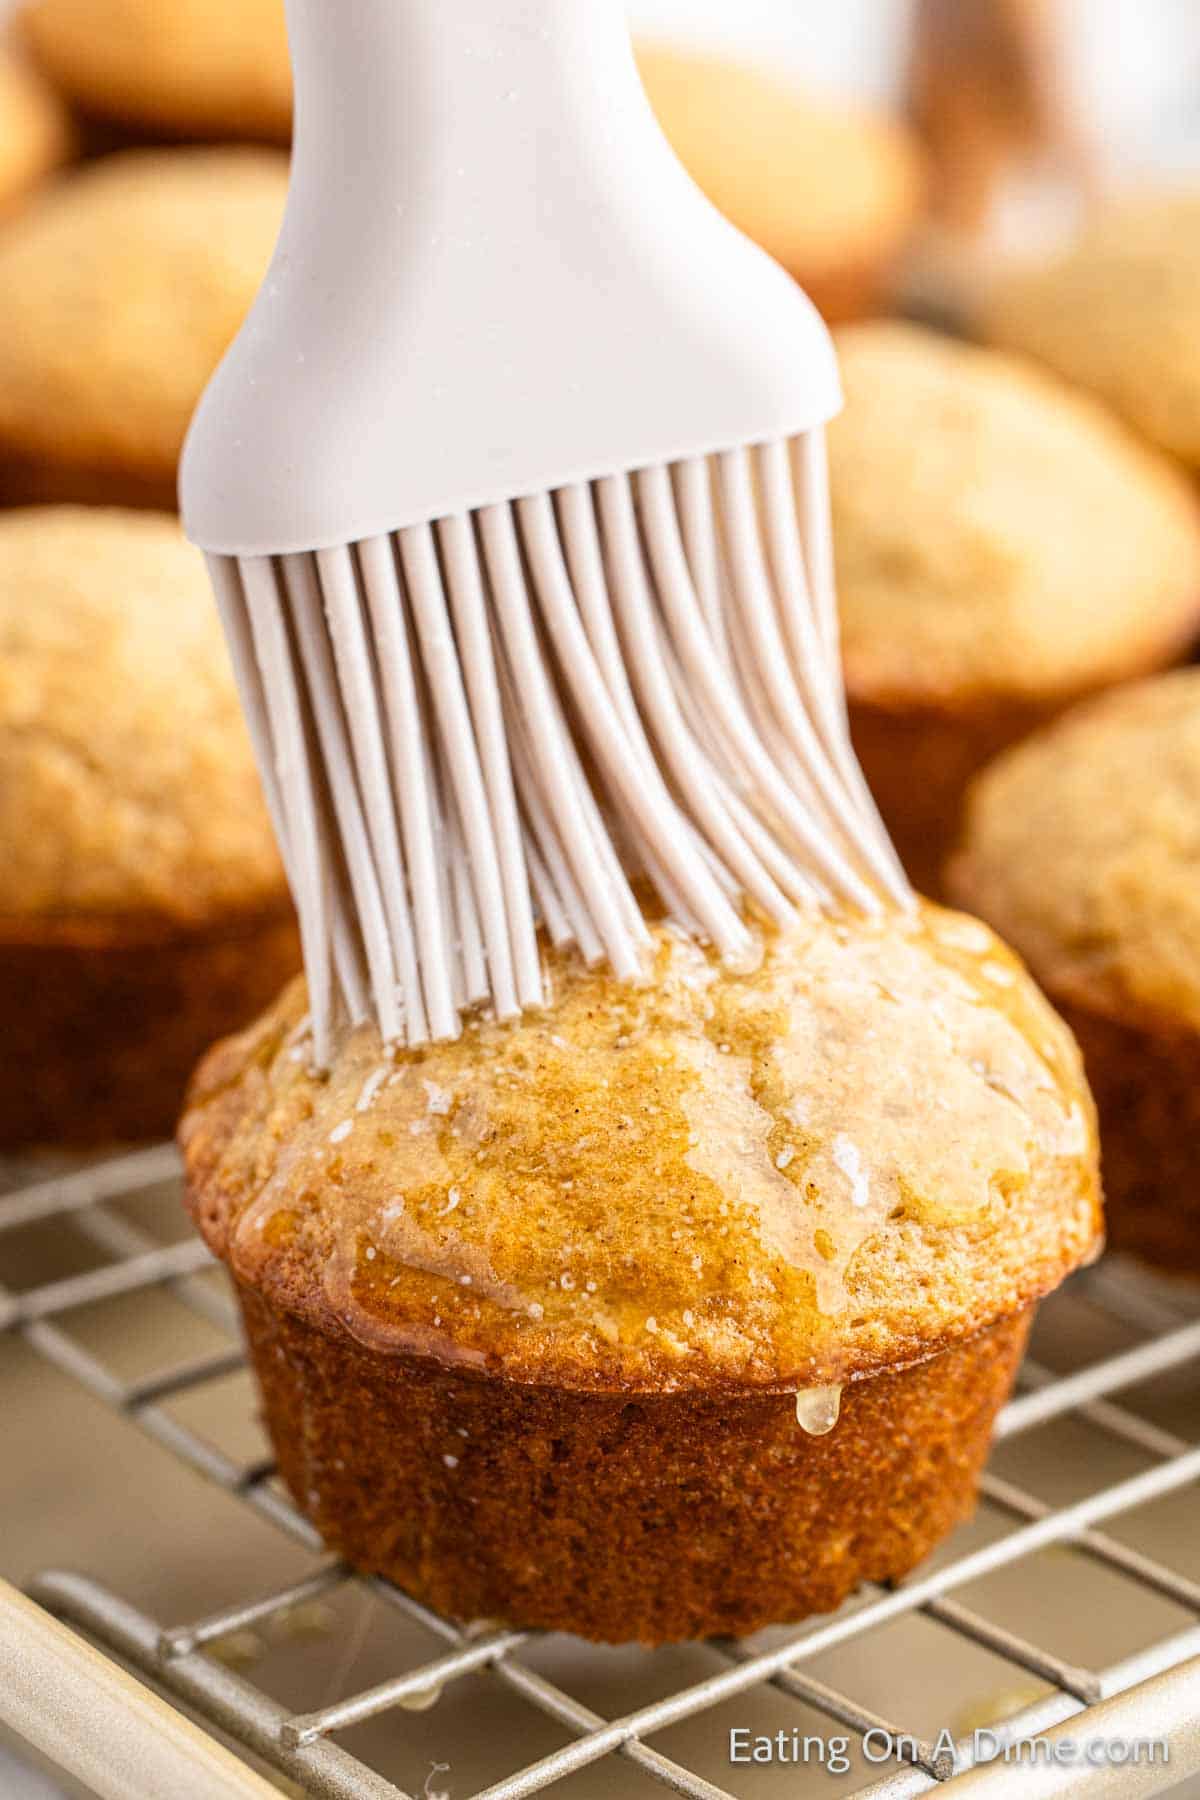 Brushing melted butter over the baked Snickerdoodle muffins on a wire rack